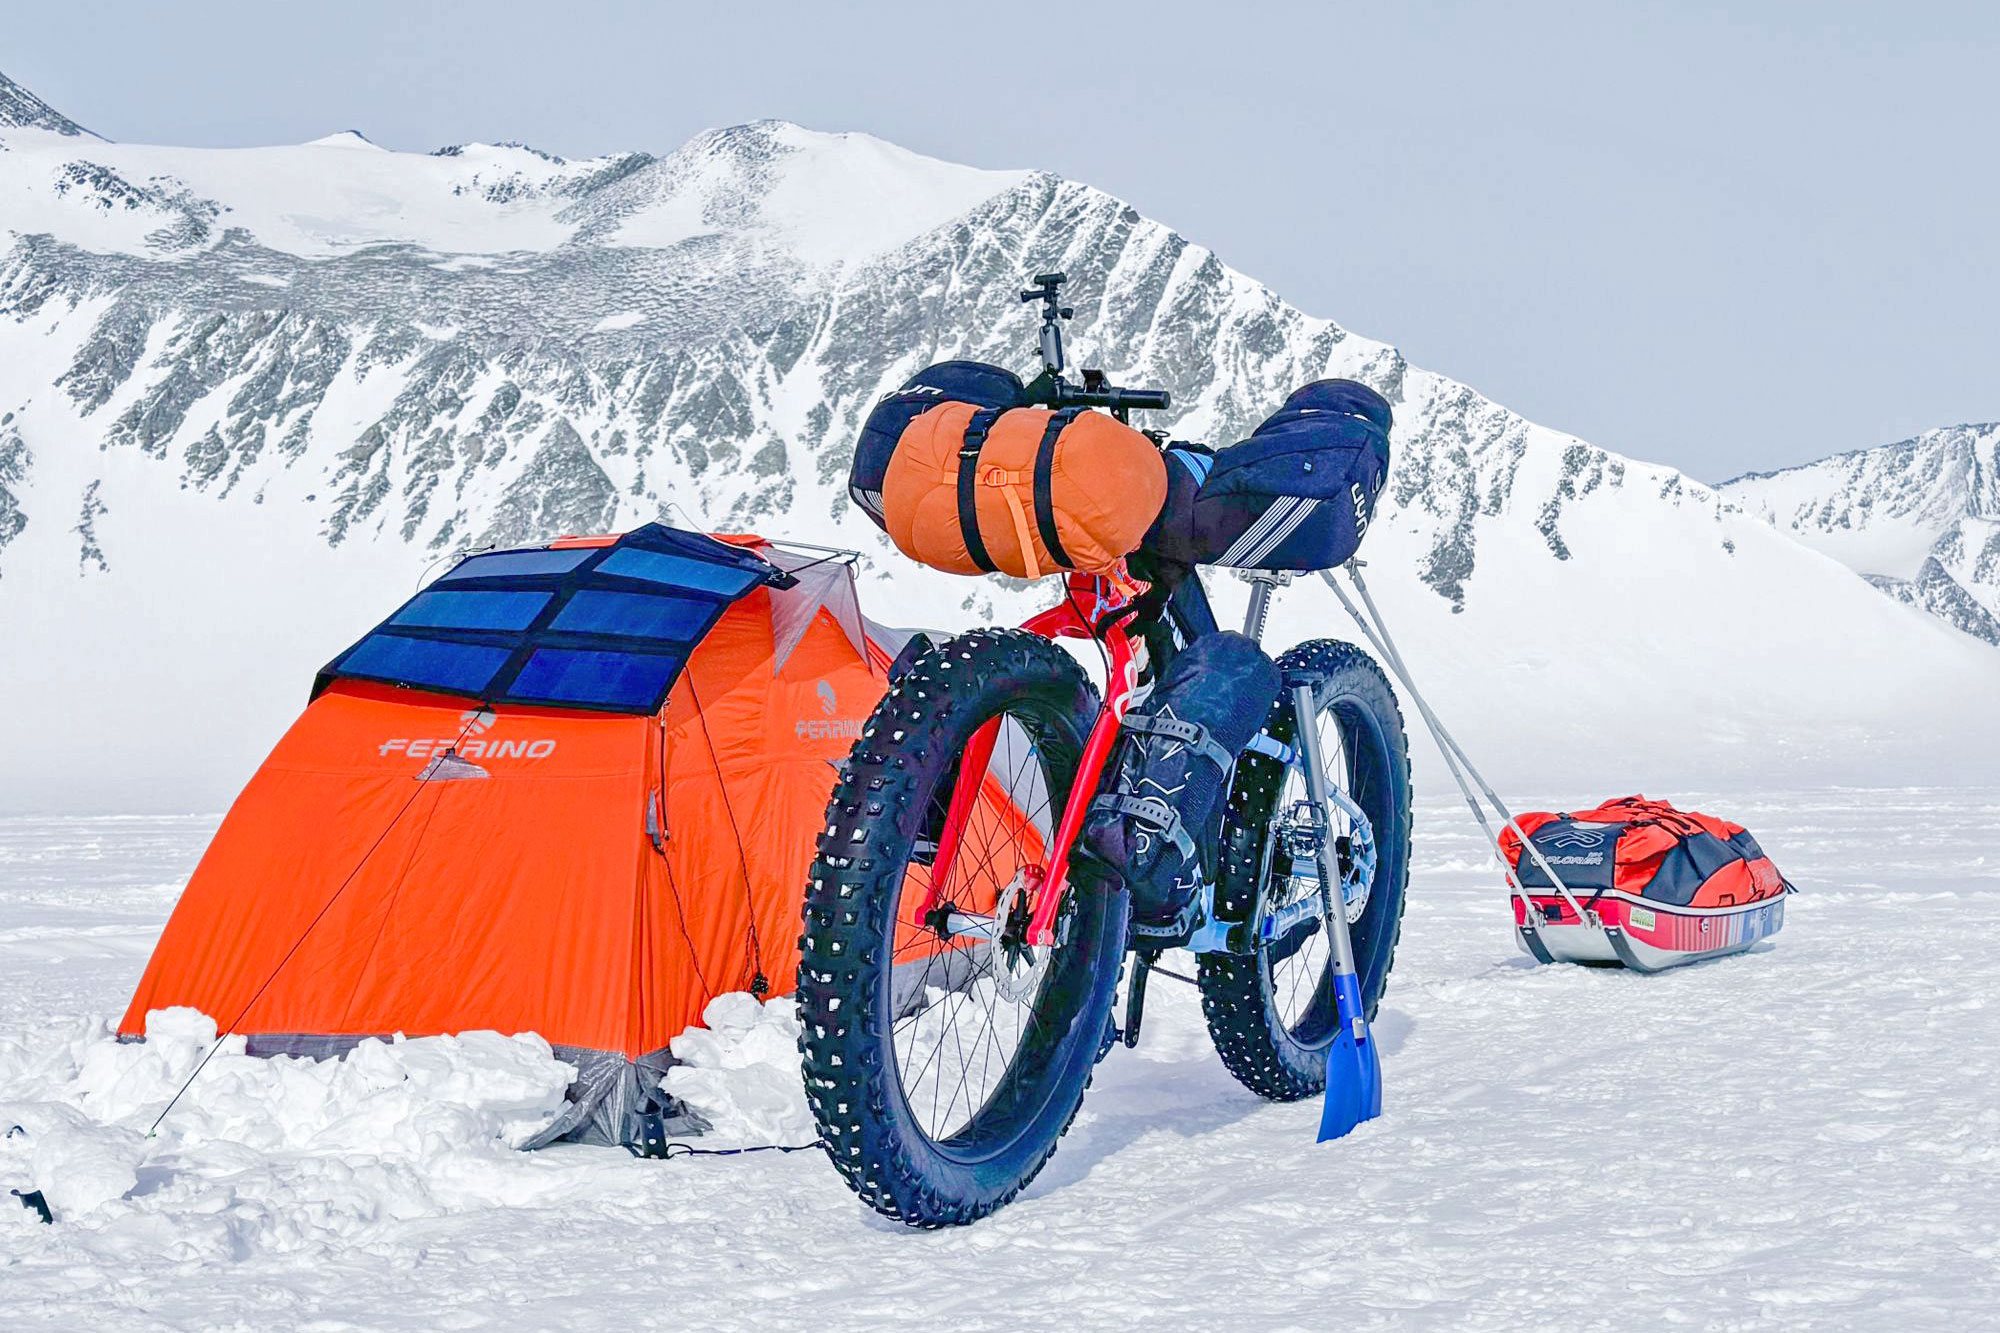 Omar di Felice Antarctica Unlimited solo crossing by fat bike, fatbike expedition for climate change awareness